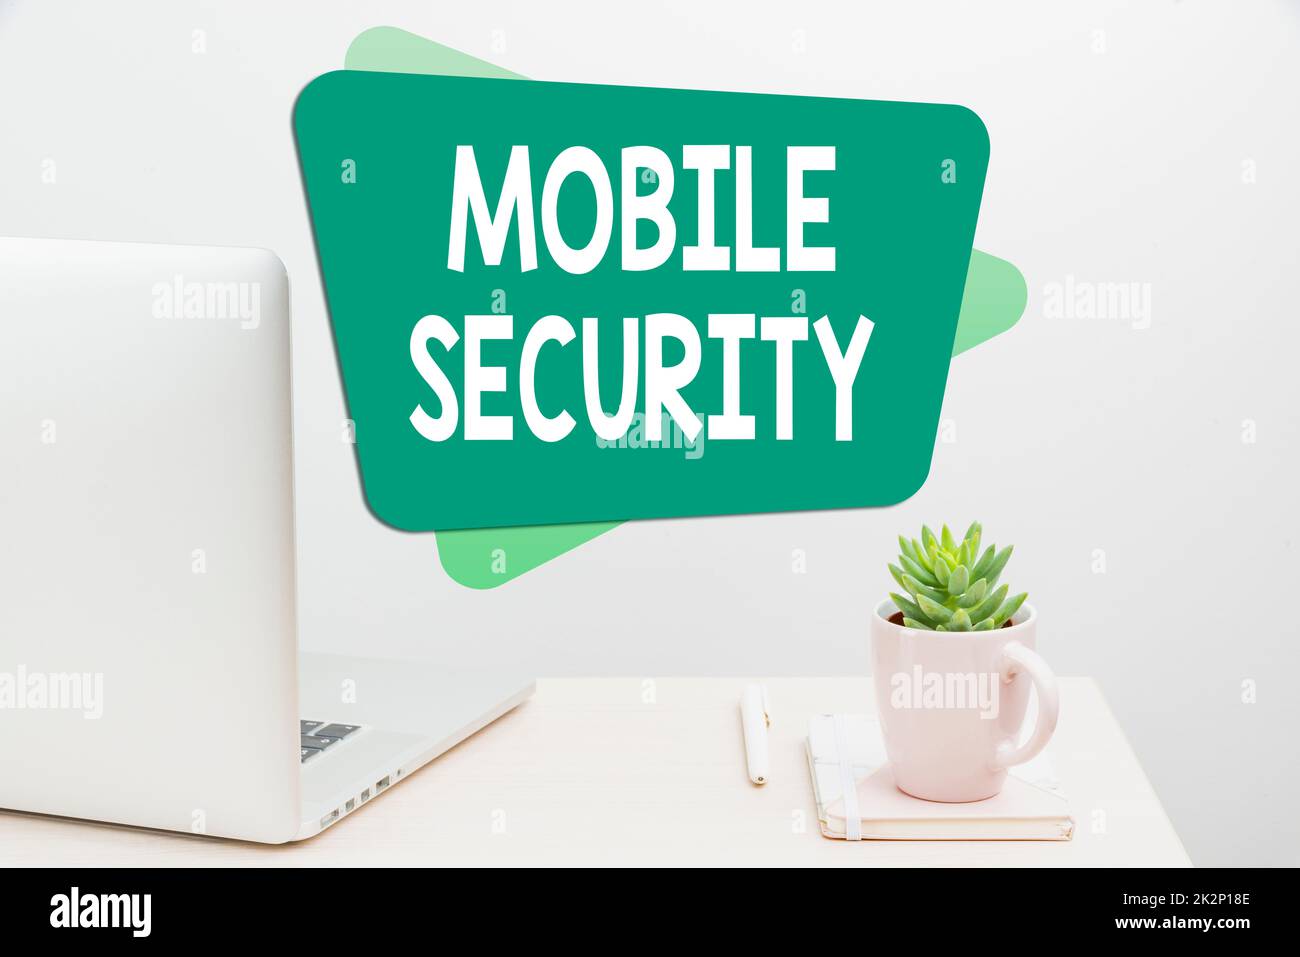 Text caption presenting Mobile Security. Business concept Protection of mobile phone from threats and vulnerabilities Tidy Workspace Setup, Writing Desk Tools Equipment, Smart Office Stock Photo